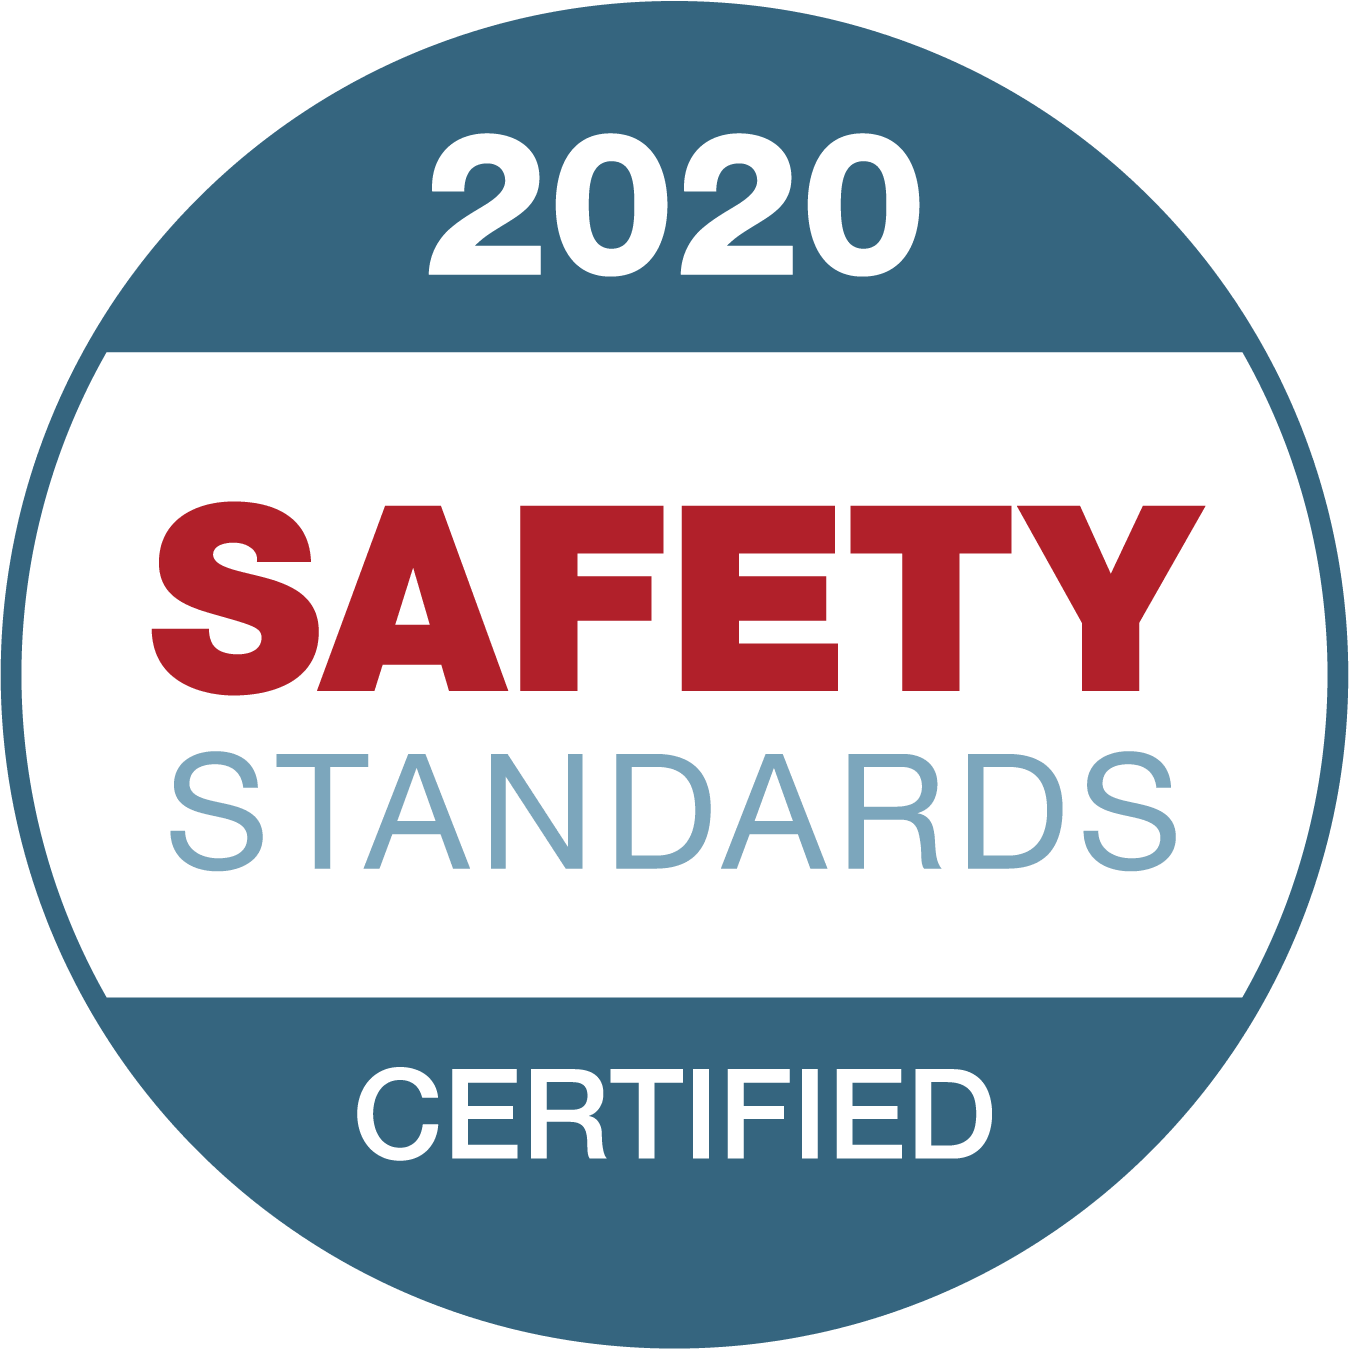 2020 safety standards certified